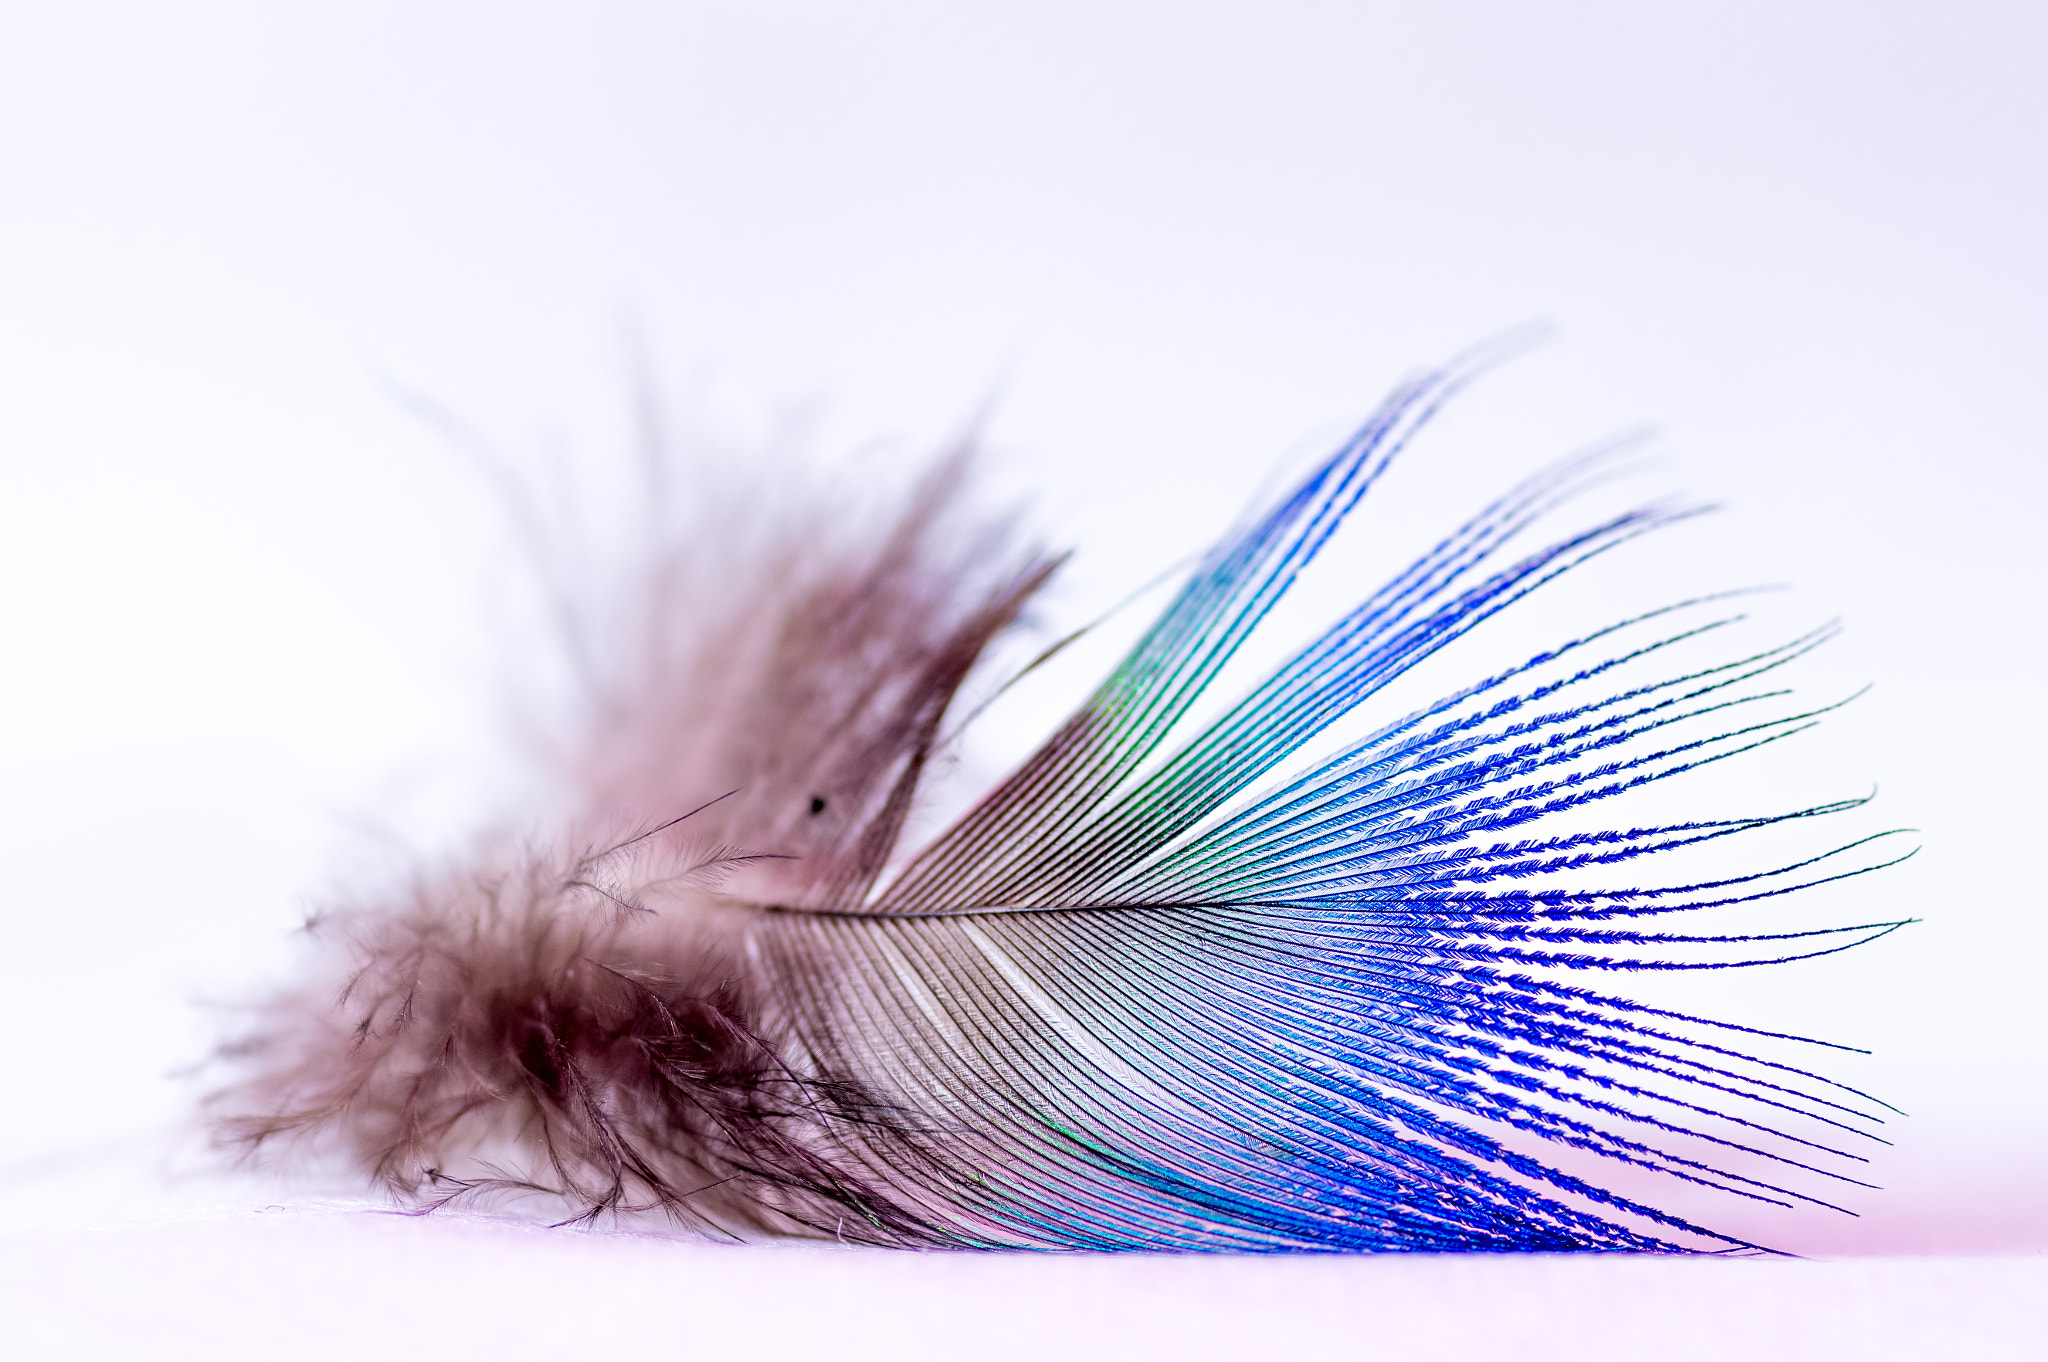 Pentax K-3 sample photo. Feather photography